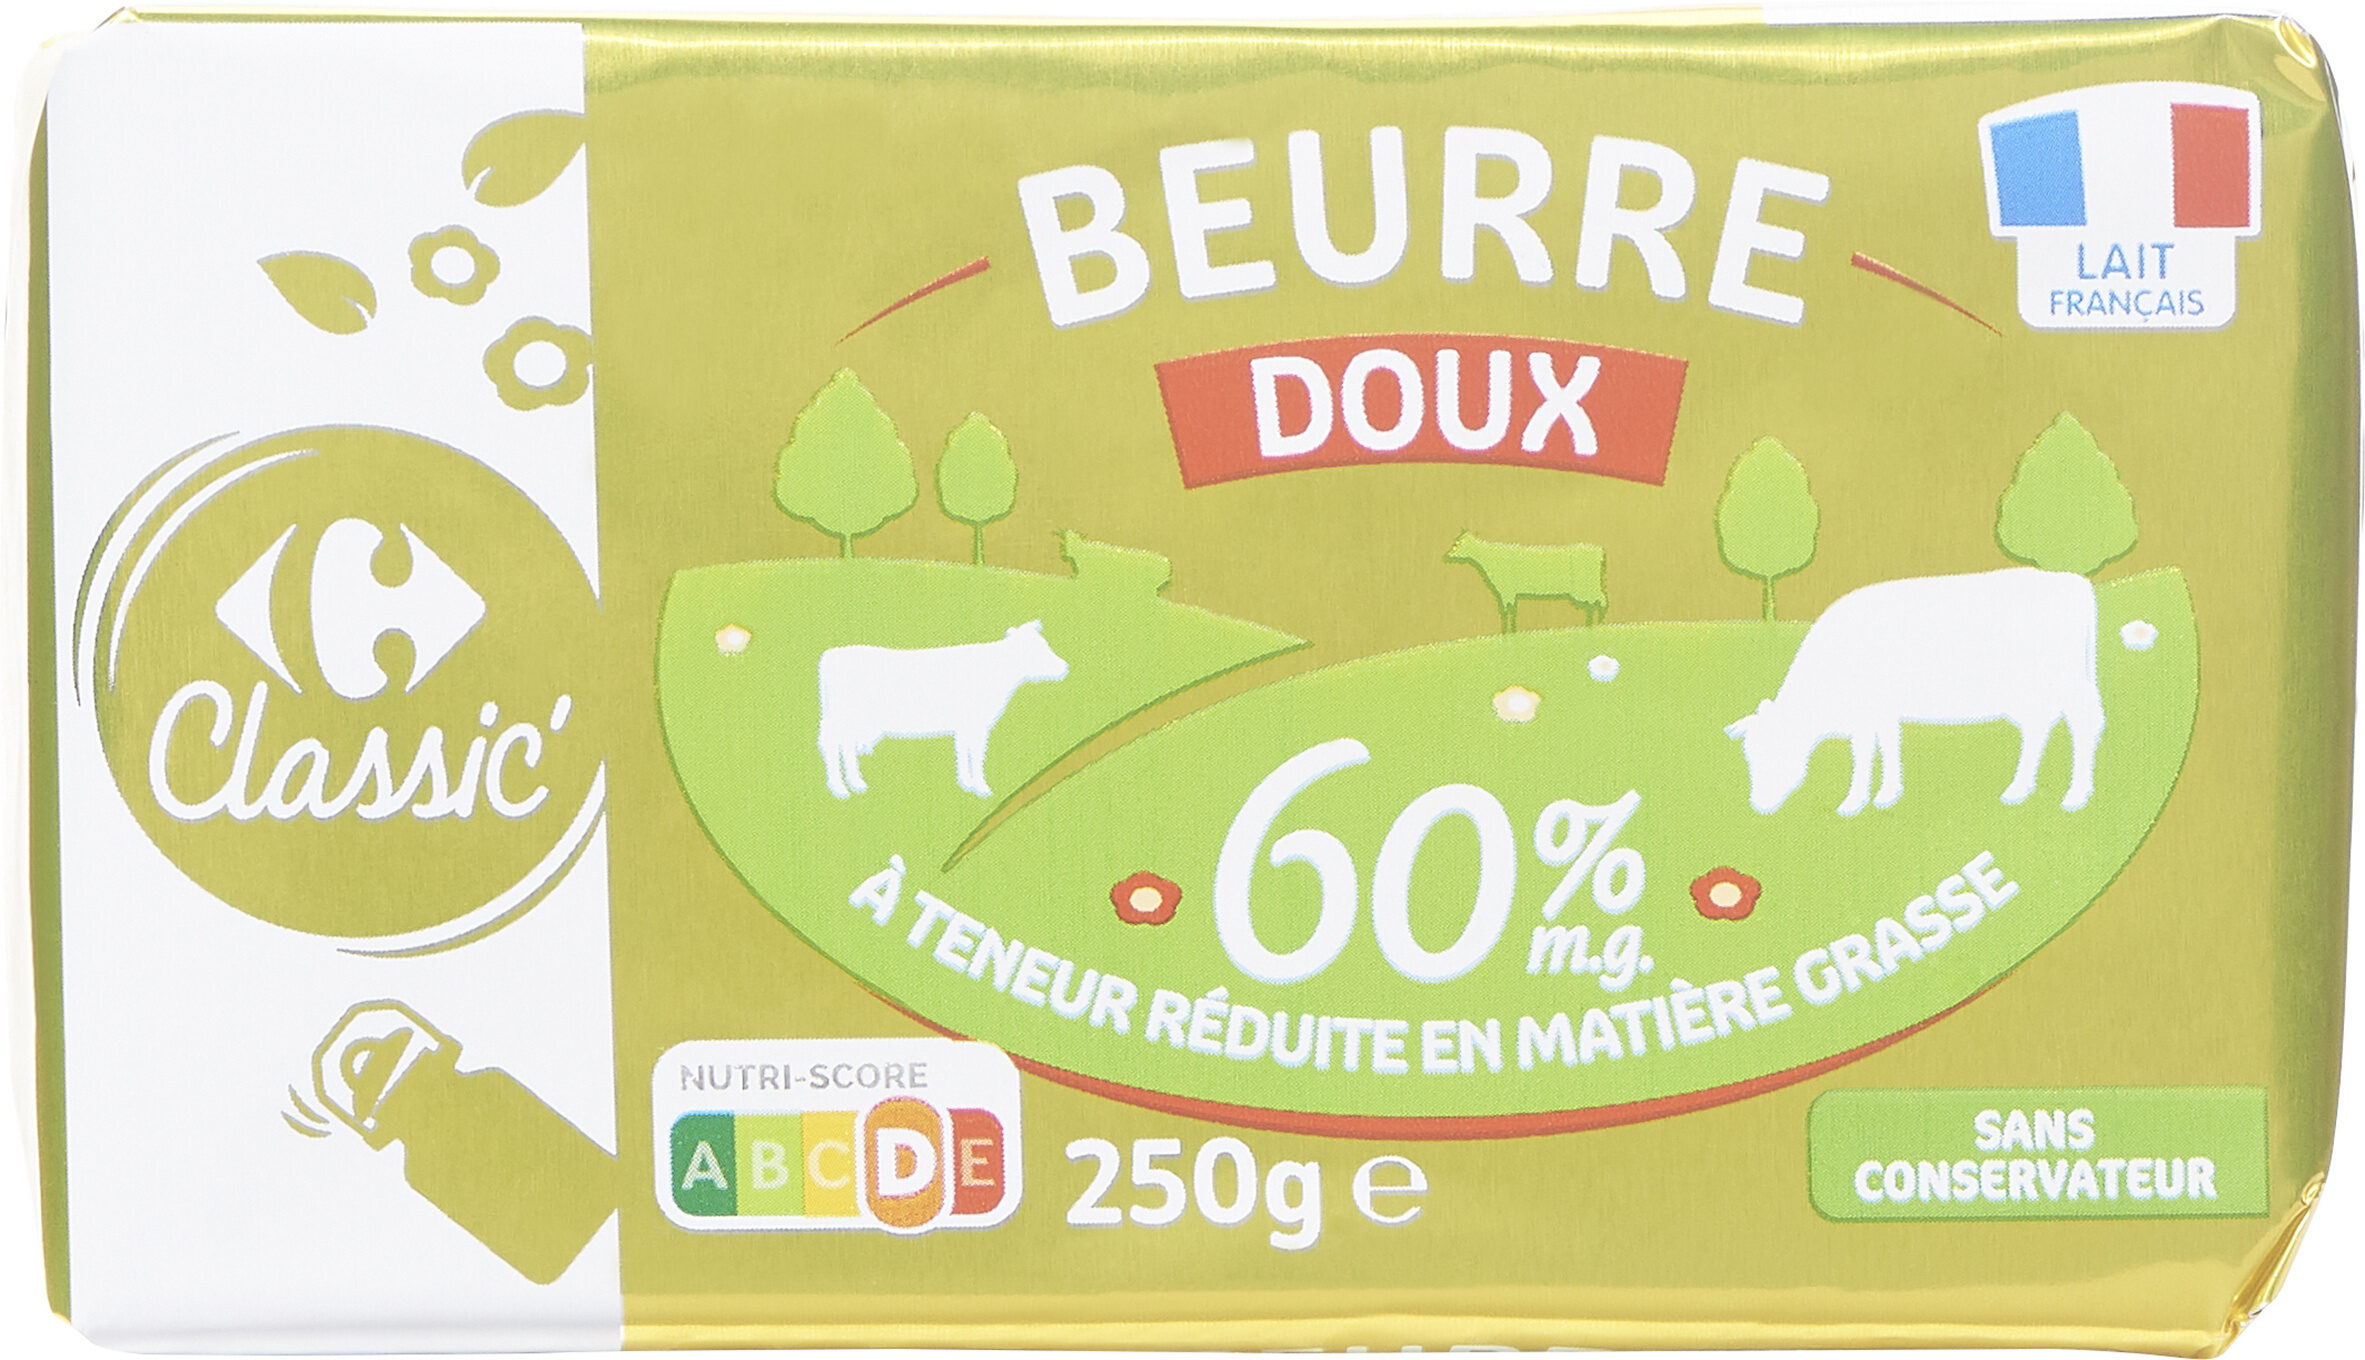 Beurre doux 60% mg - Product - fr